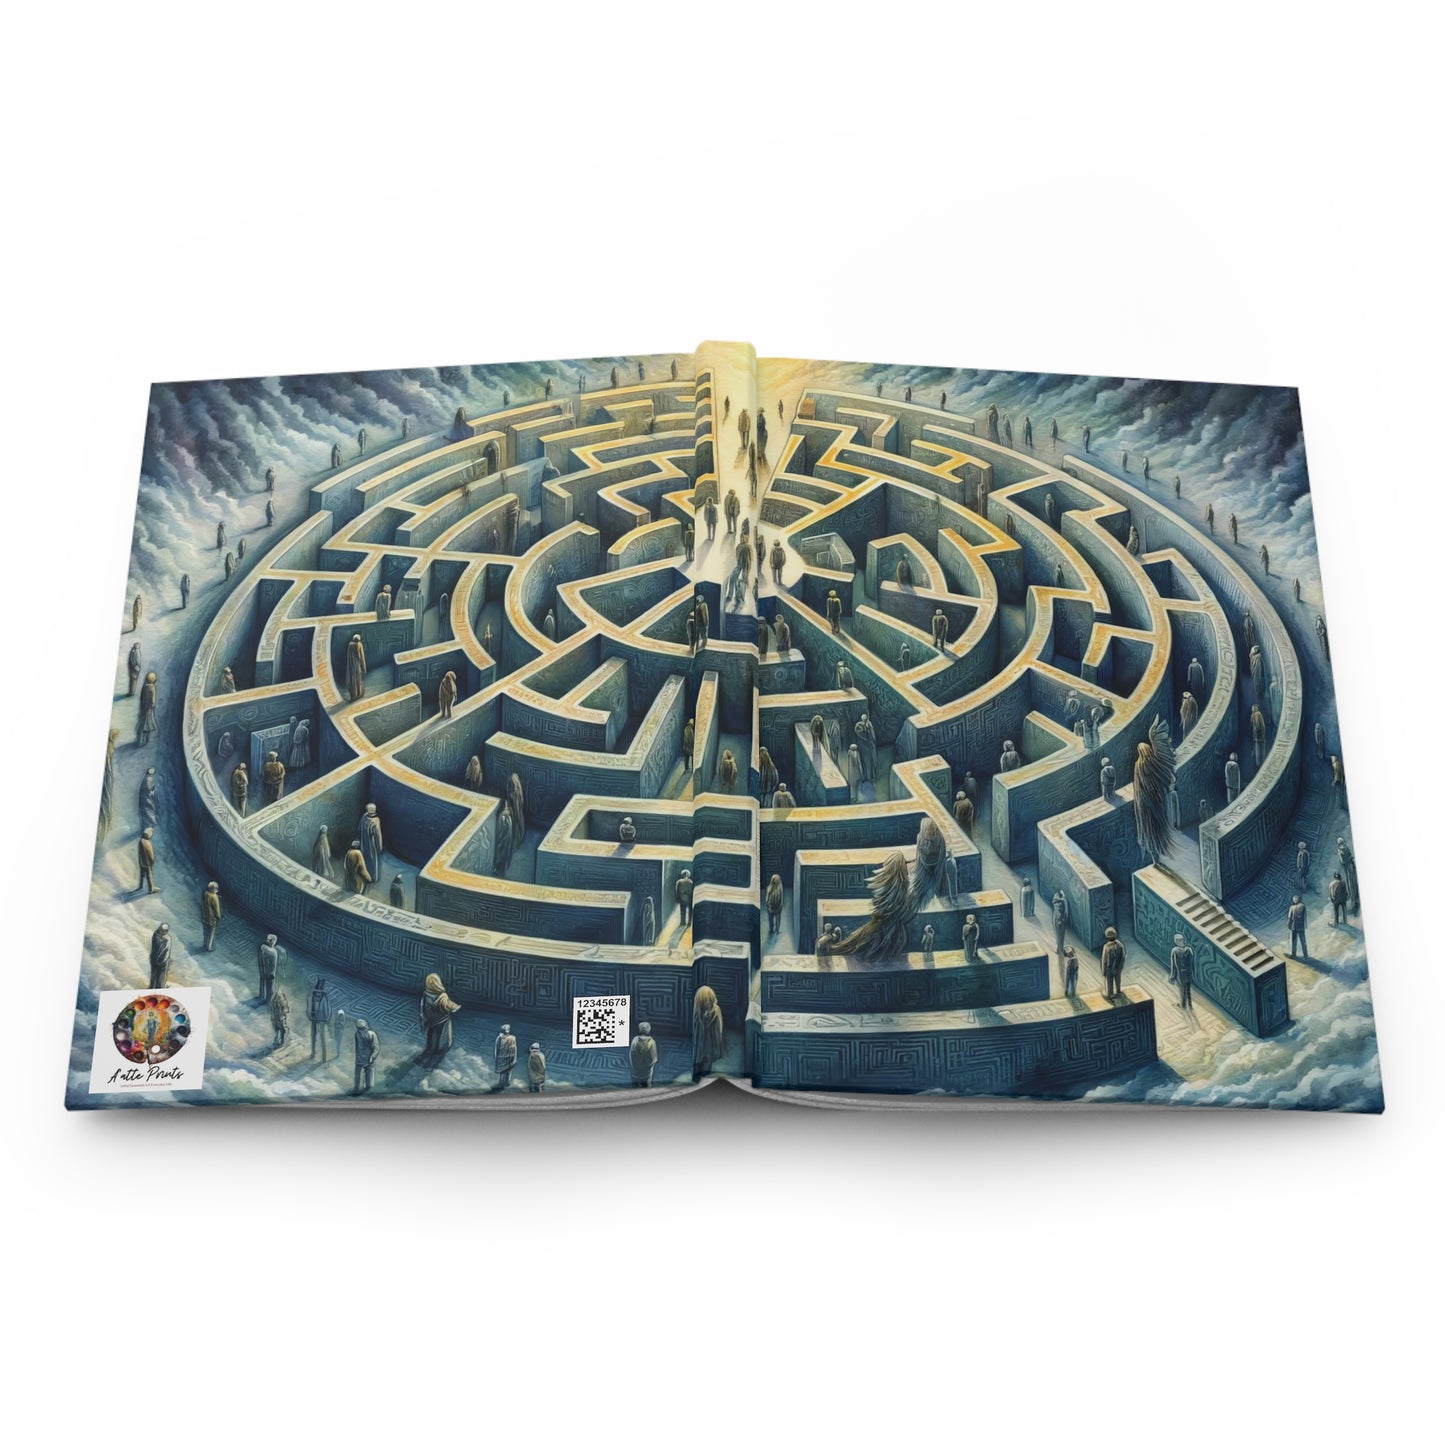 Labyrinth of Choices Hardcover Journal Matte Finish- Artistic Notebook for Reflection - 150 Lined Pages for Writing (75 Sheets)